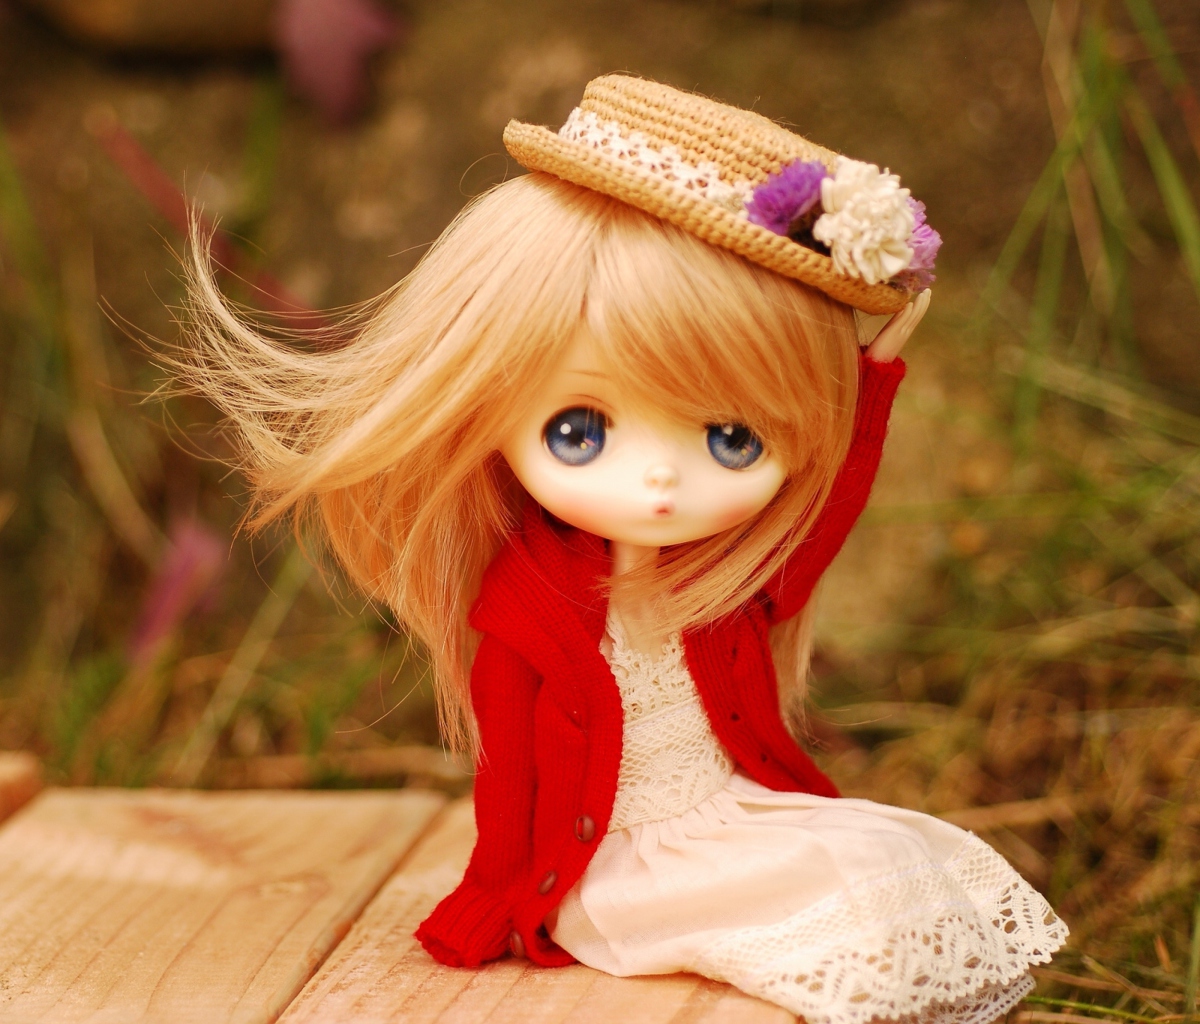 Blonde Doll In Romantic Dress And Hat wallpaper 1200x1024